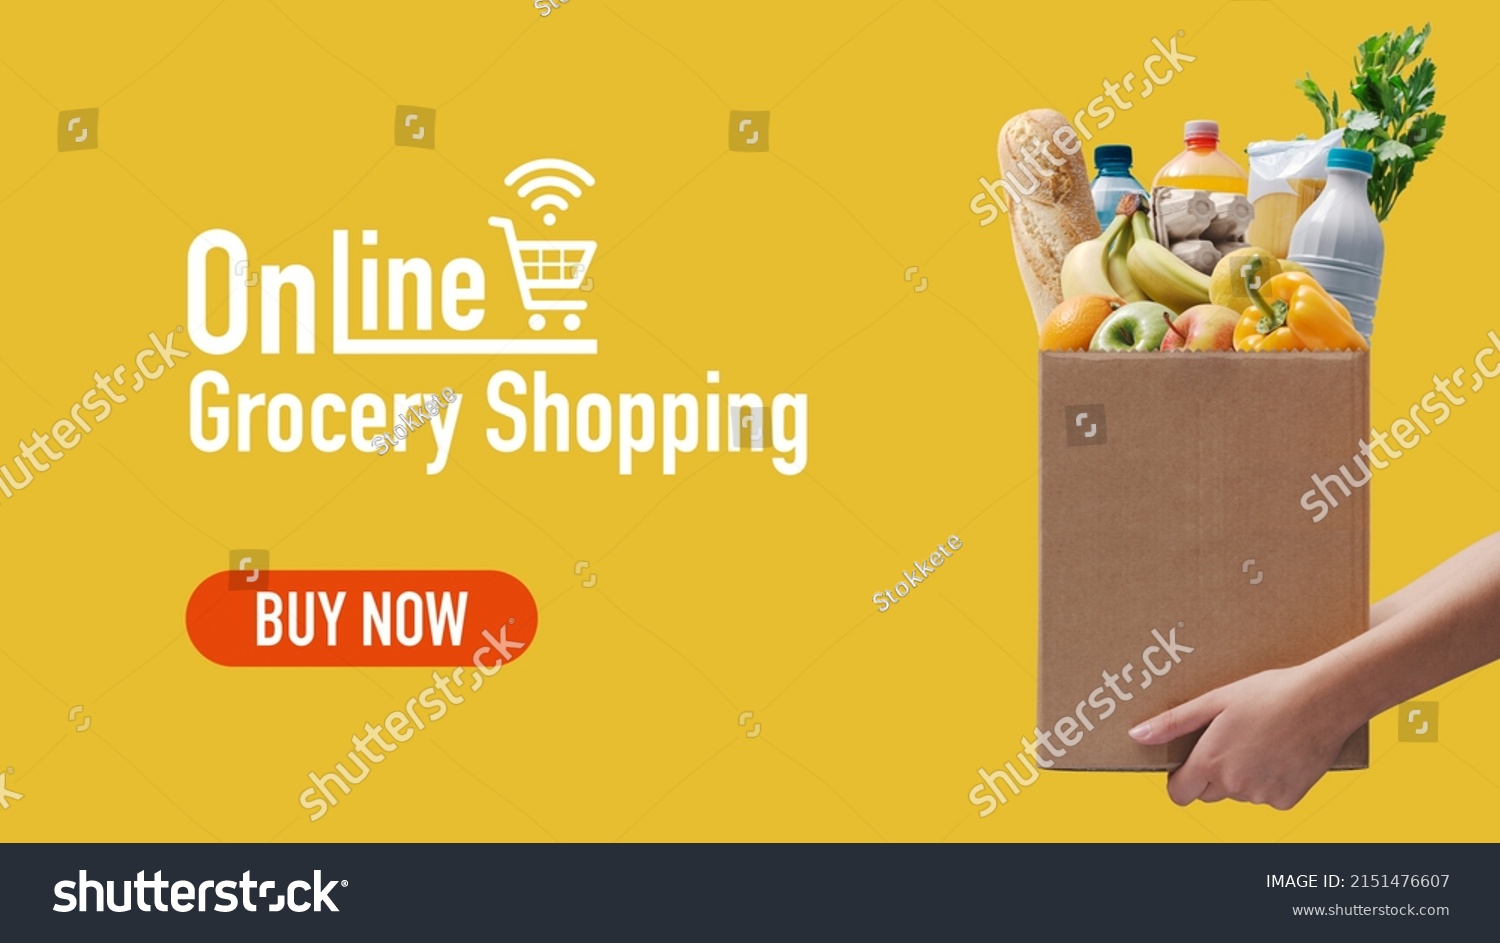 Online grocery shopping and home delivery: hands holding a box full of groceries #2151476607